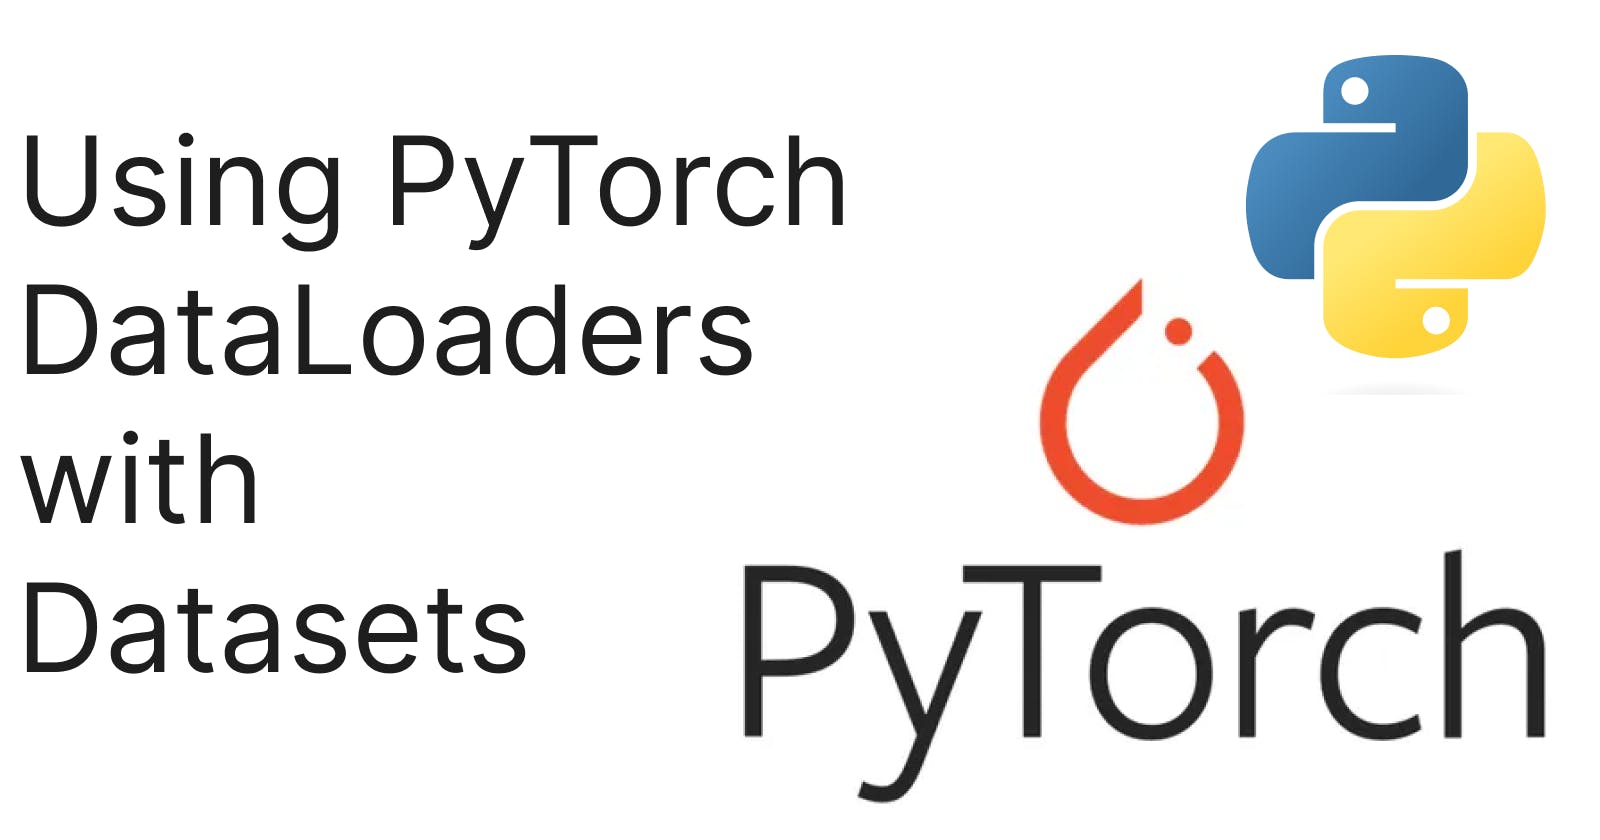 Using PyTorch DataLoaders with Datasets